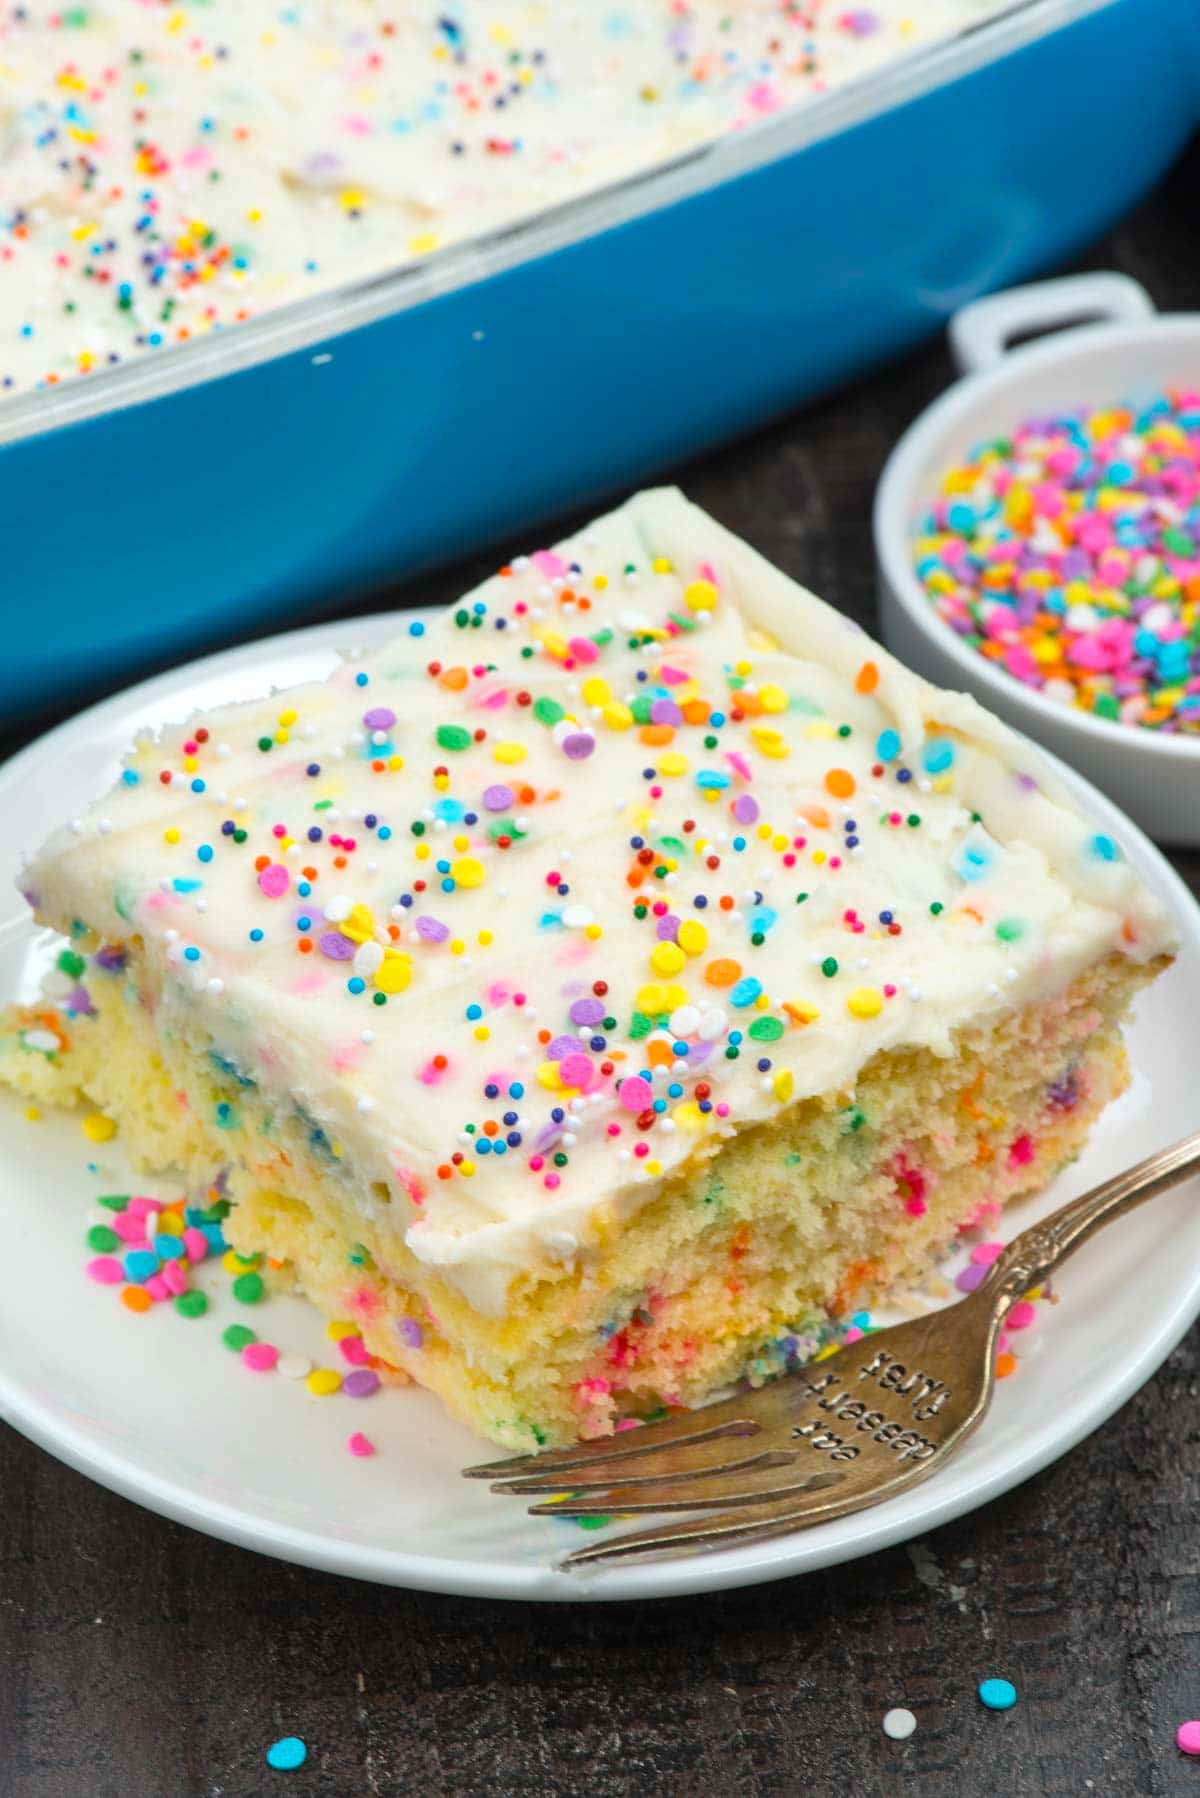 One square slice of homemade funfetti cake on plate surrounded by rainbow sprinkles